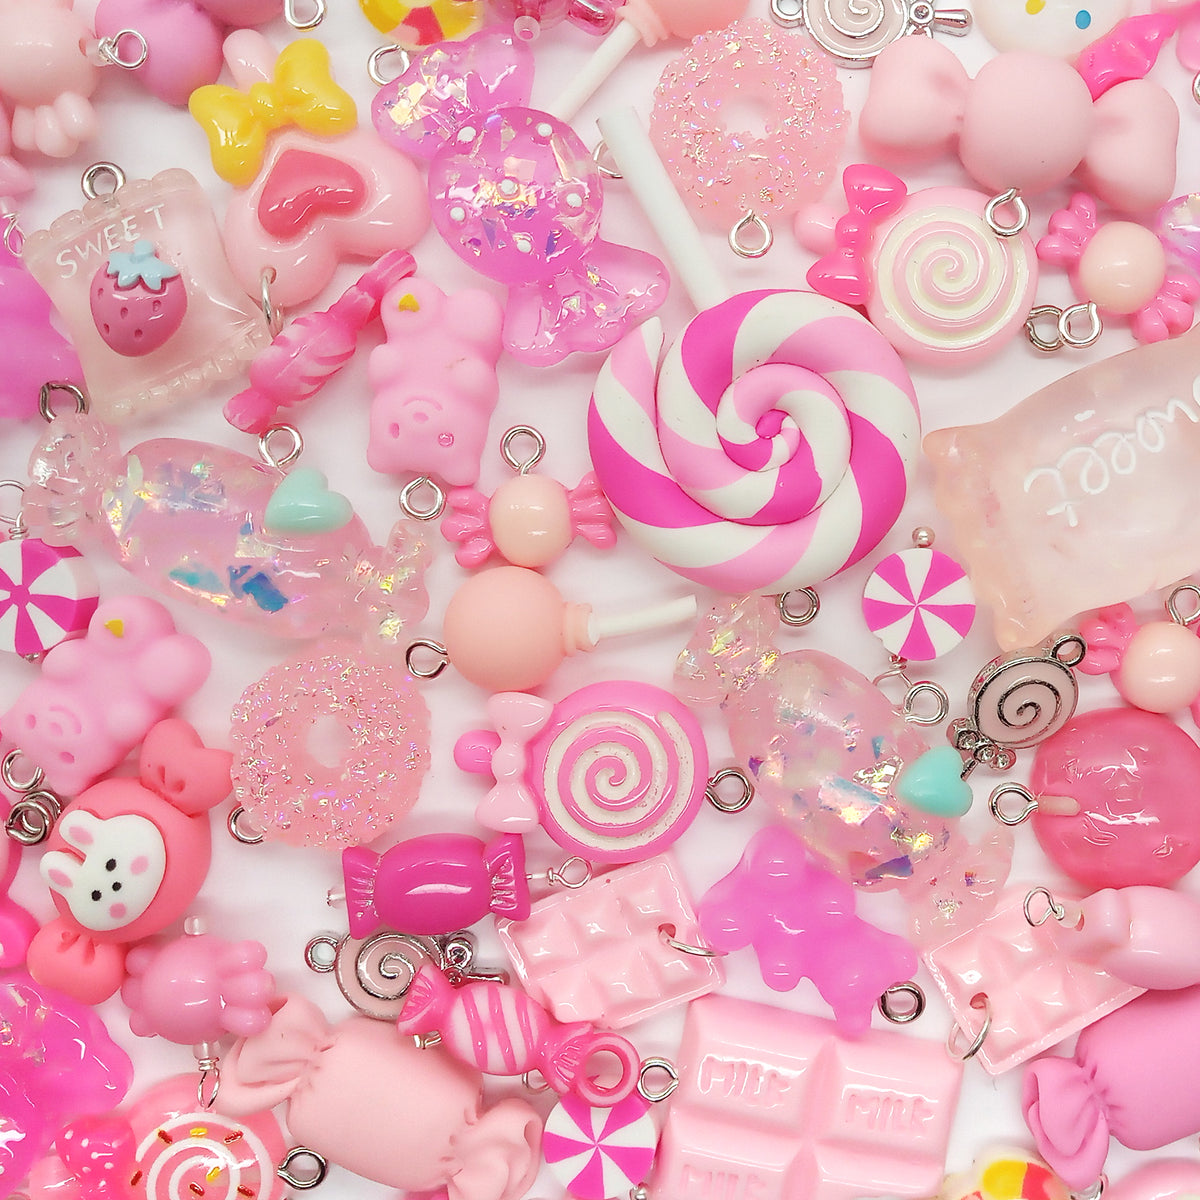 Bright Pink Candy Charms, 2 pieces, Big Resin Food Pendants